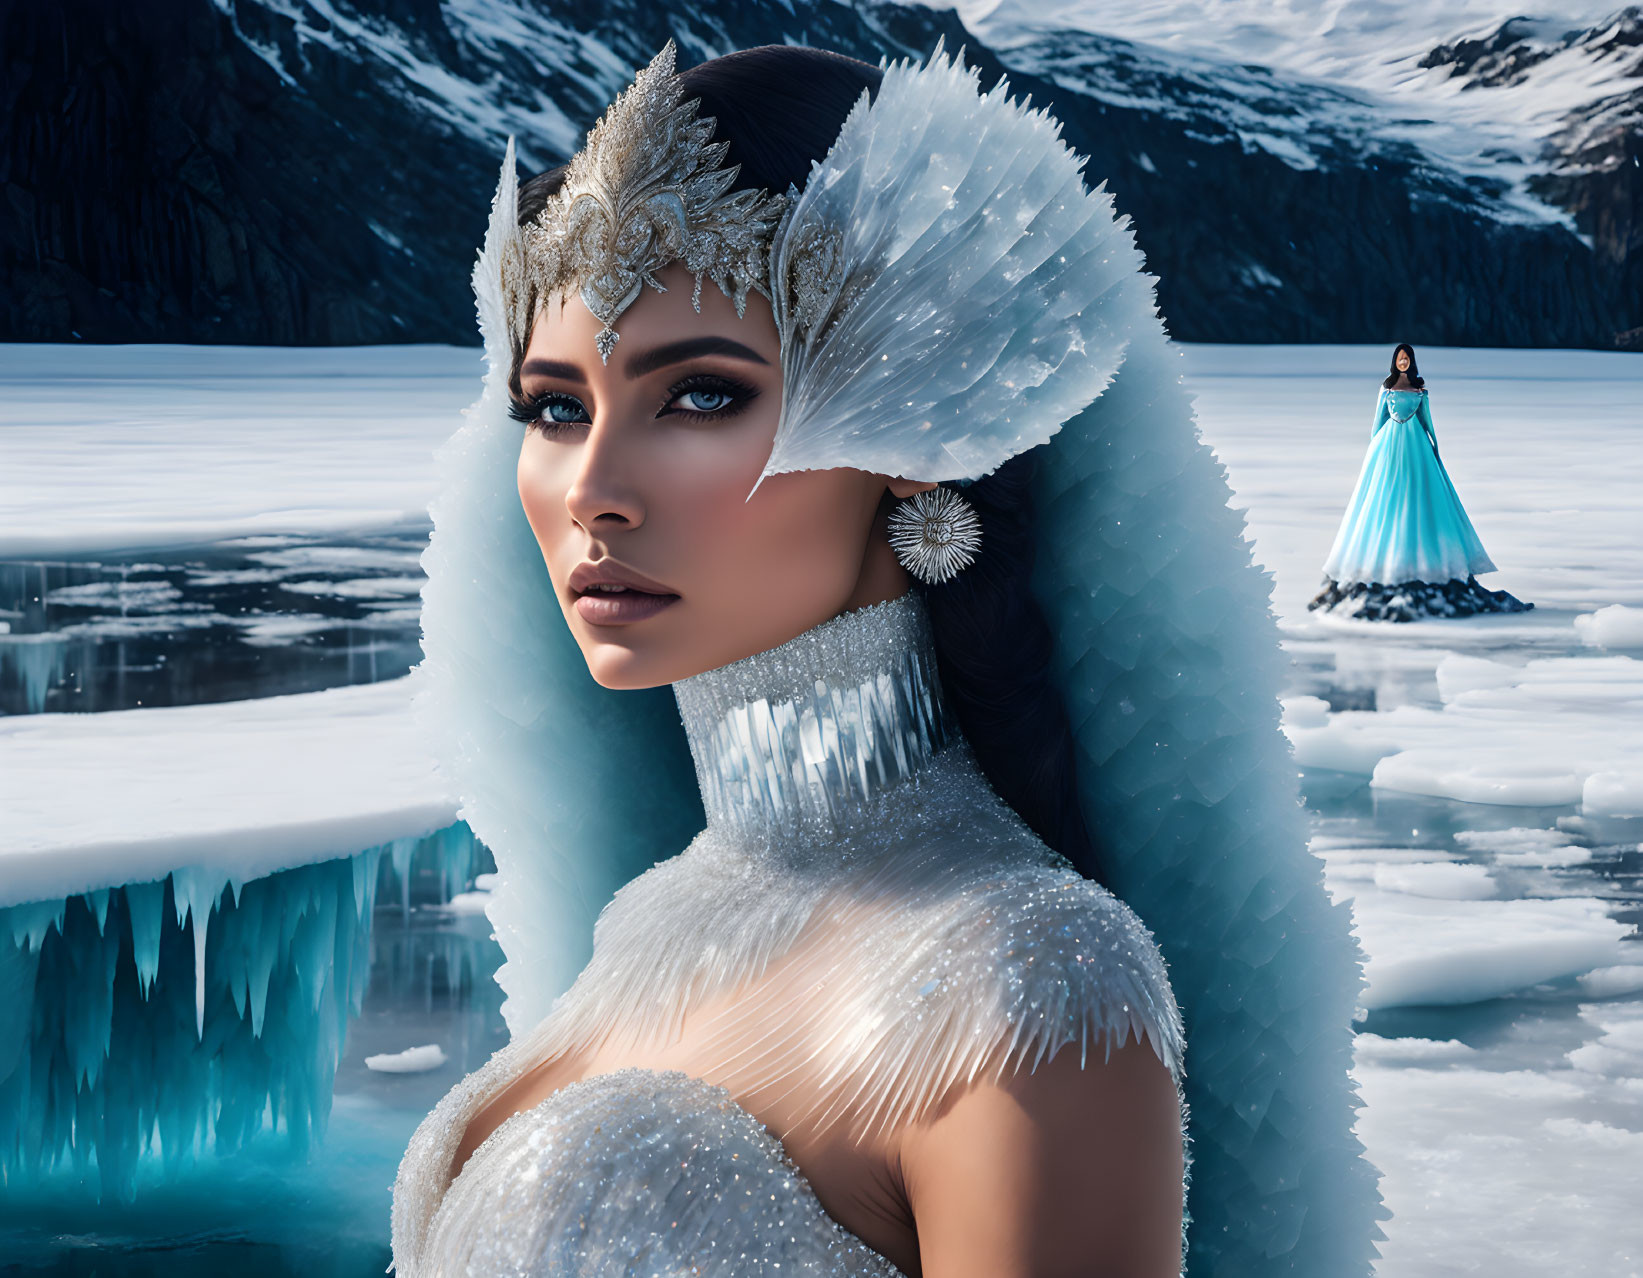 Woman of the ice land.